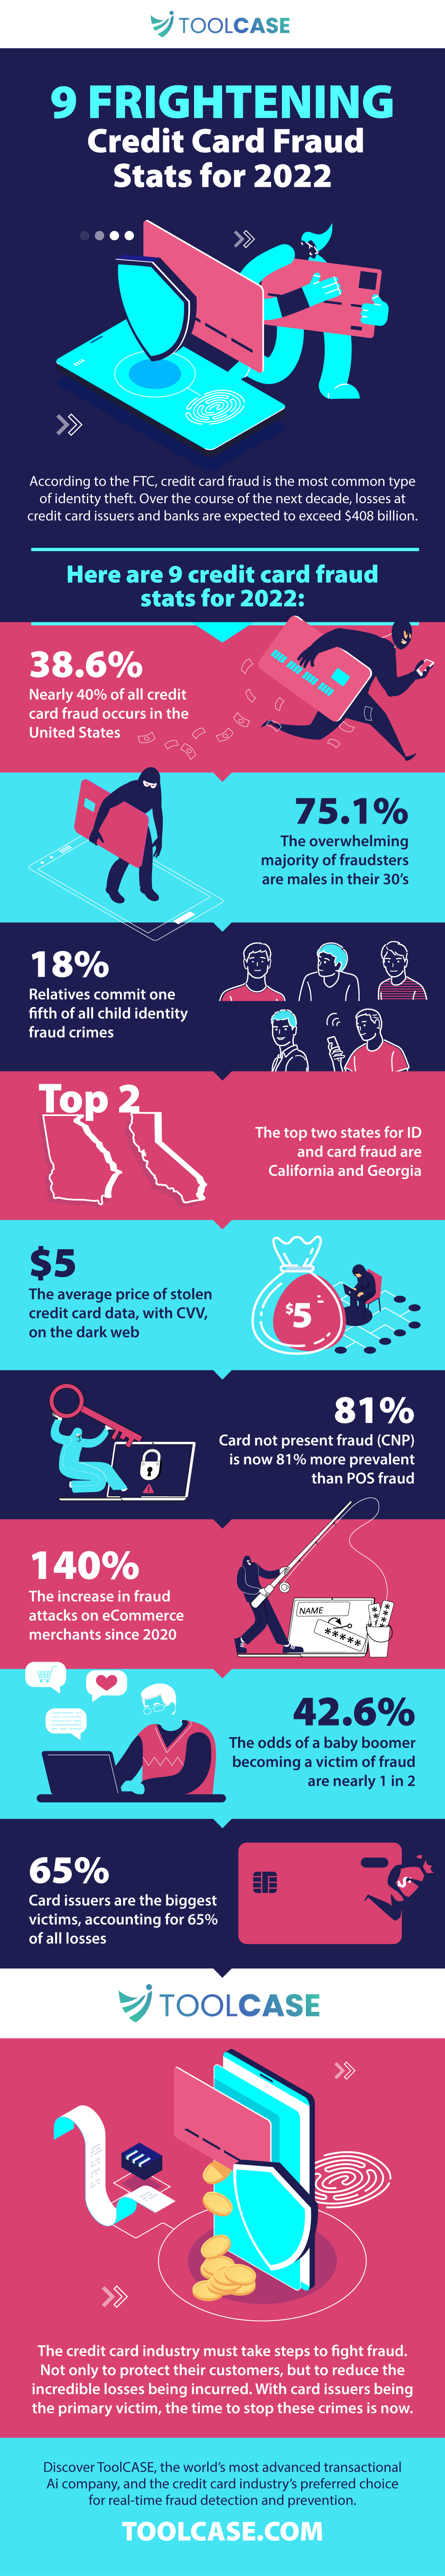 9 Frightening Credit Card Fraud Stats for 2022